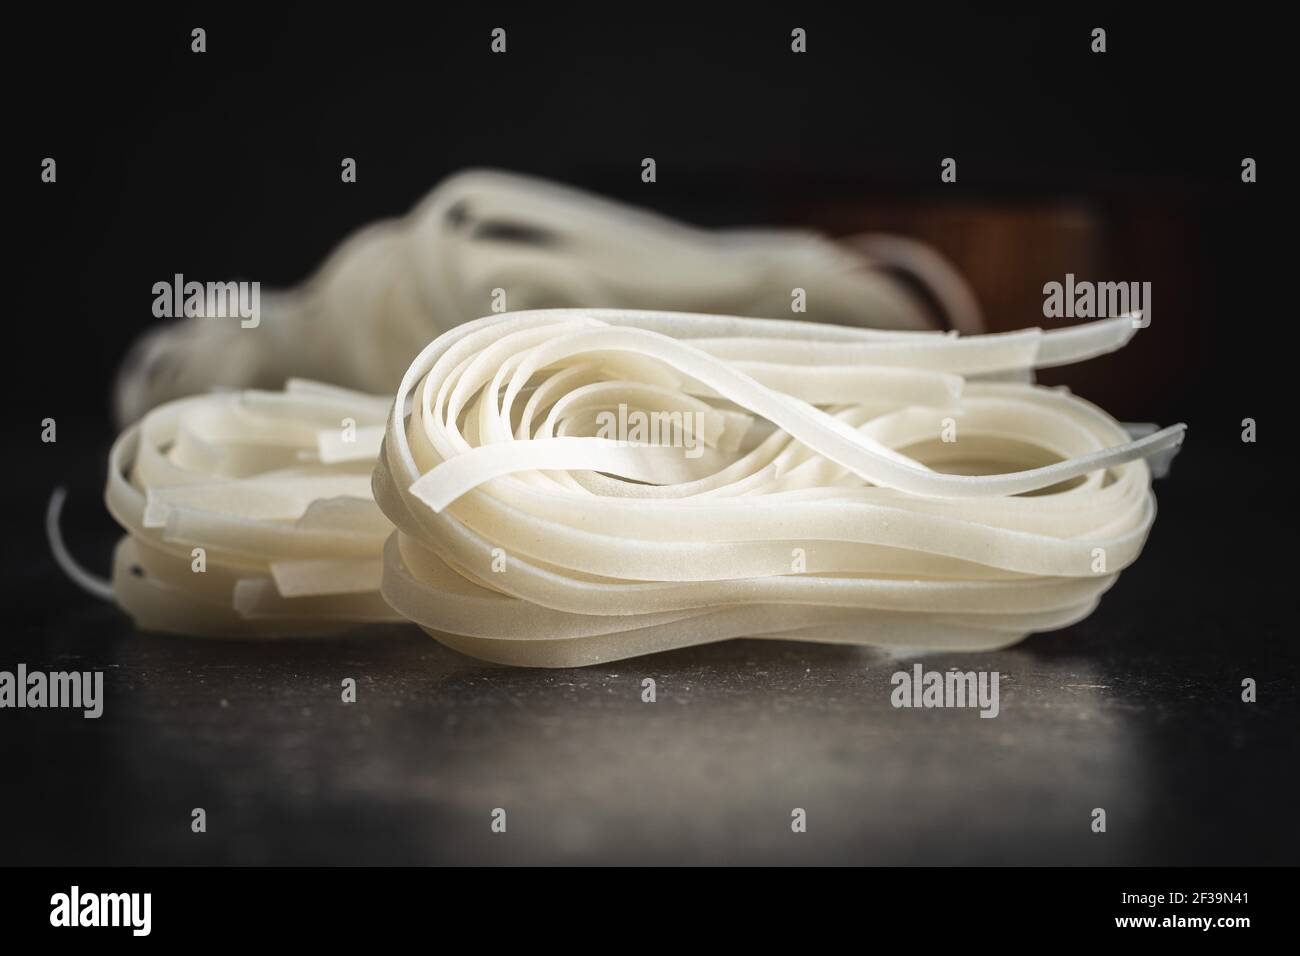 Dried white rice noodles. Raw pasta. Uncooked noodles on black table. Stock Photo